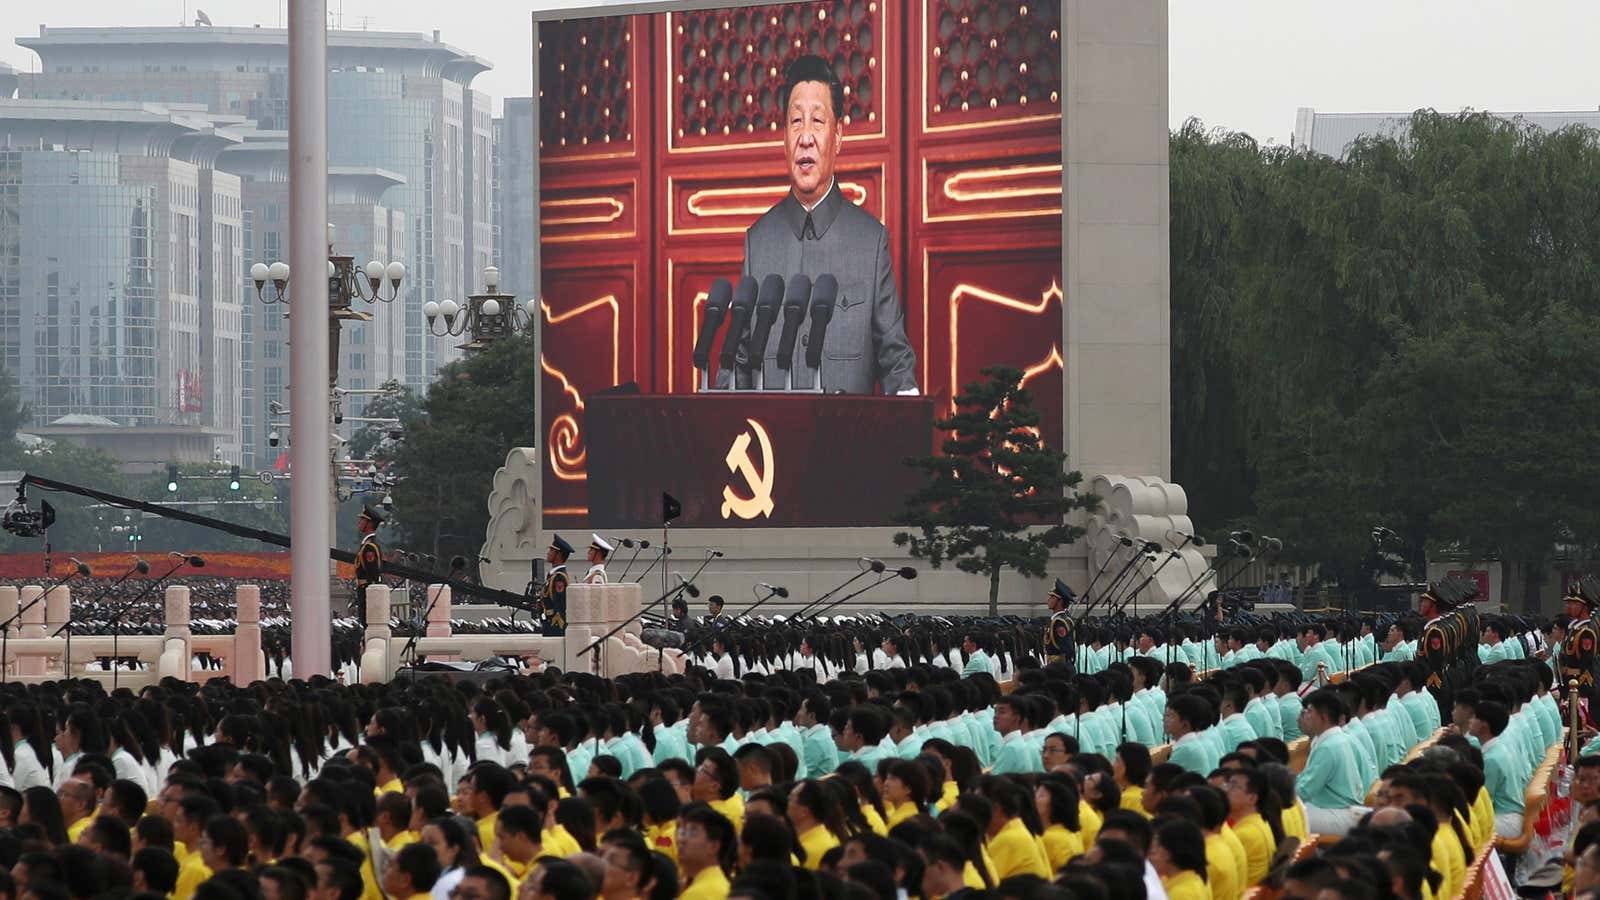 The 100th anniversary of the Chinese Communist Party is a controversial birthday.